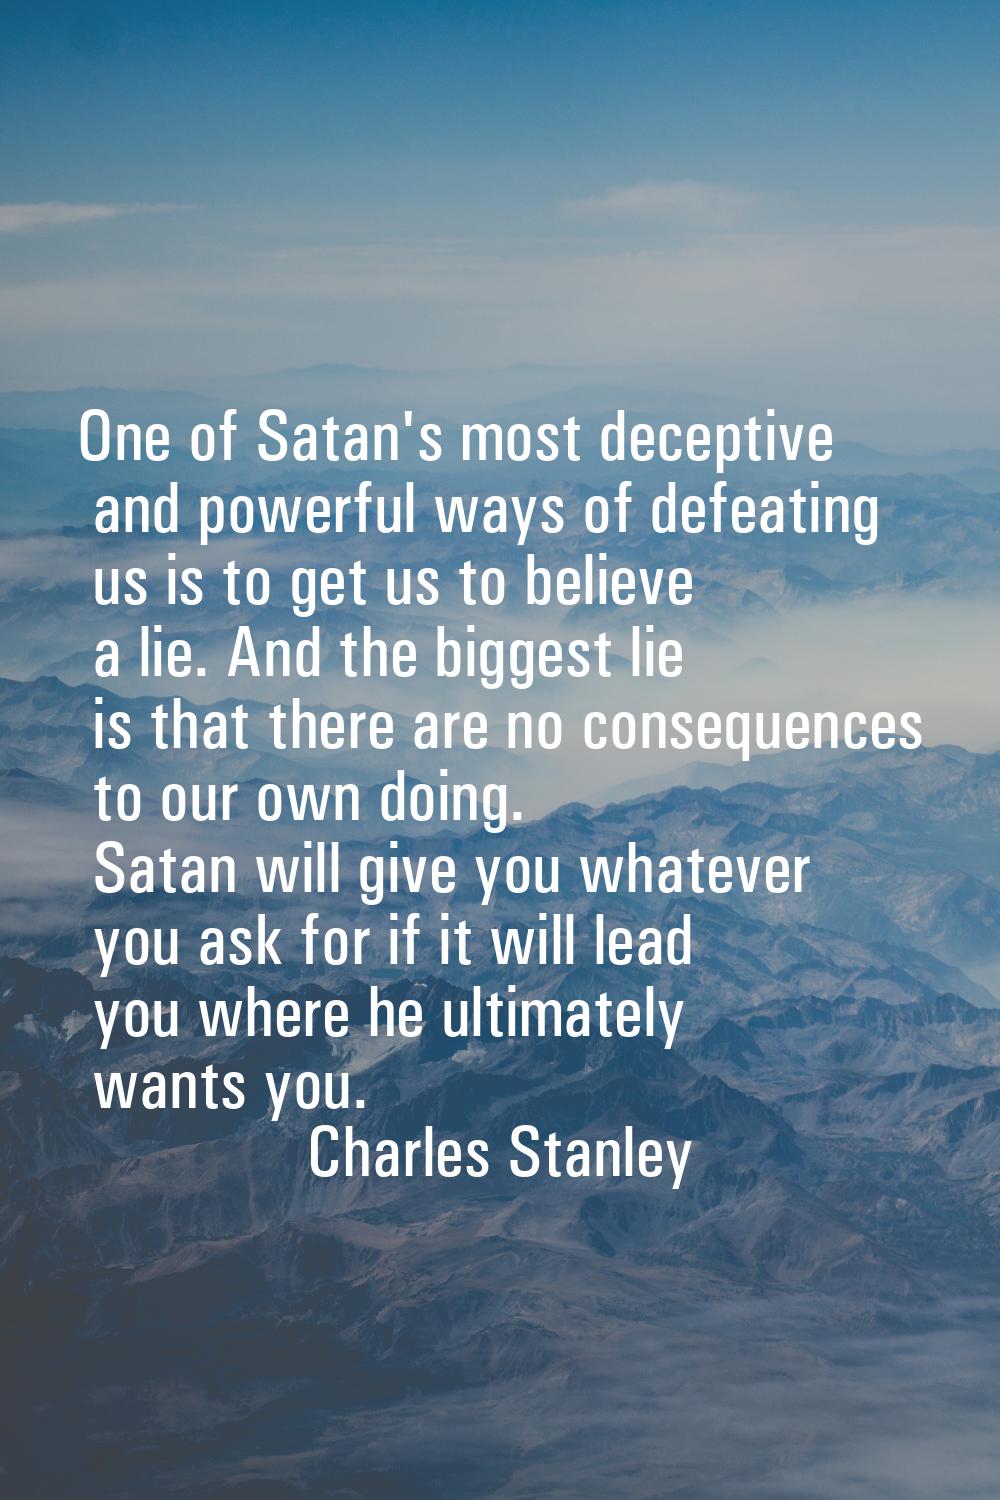 One of Satan's most deceptive and powerful ways of defeating us is to get us to believe a lie. And 